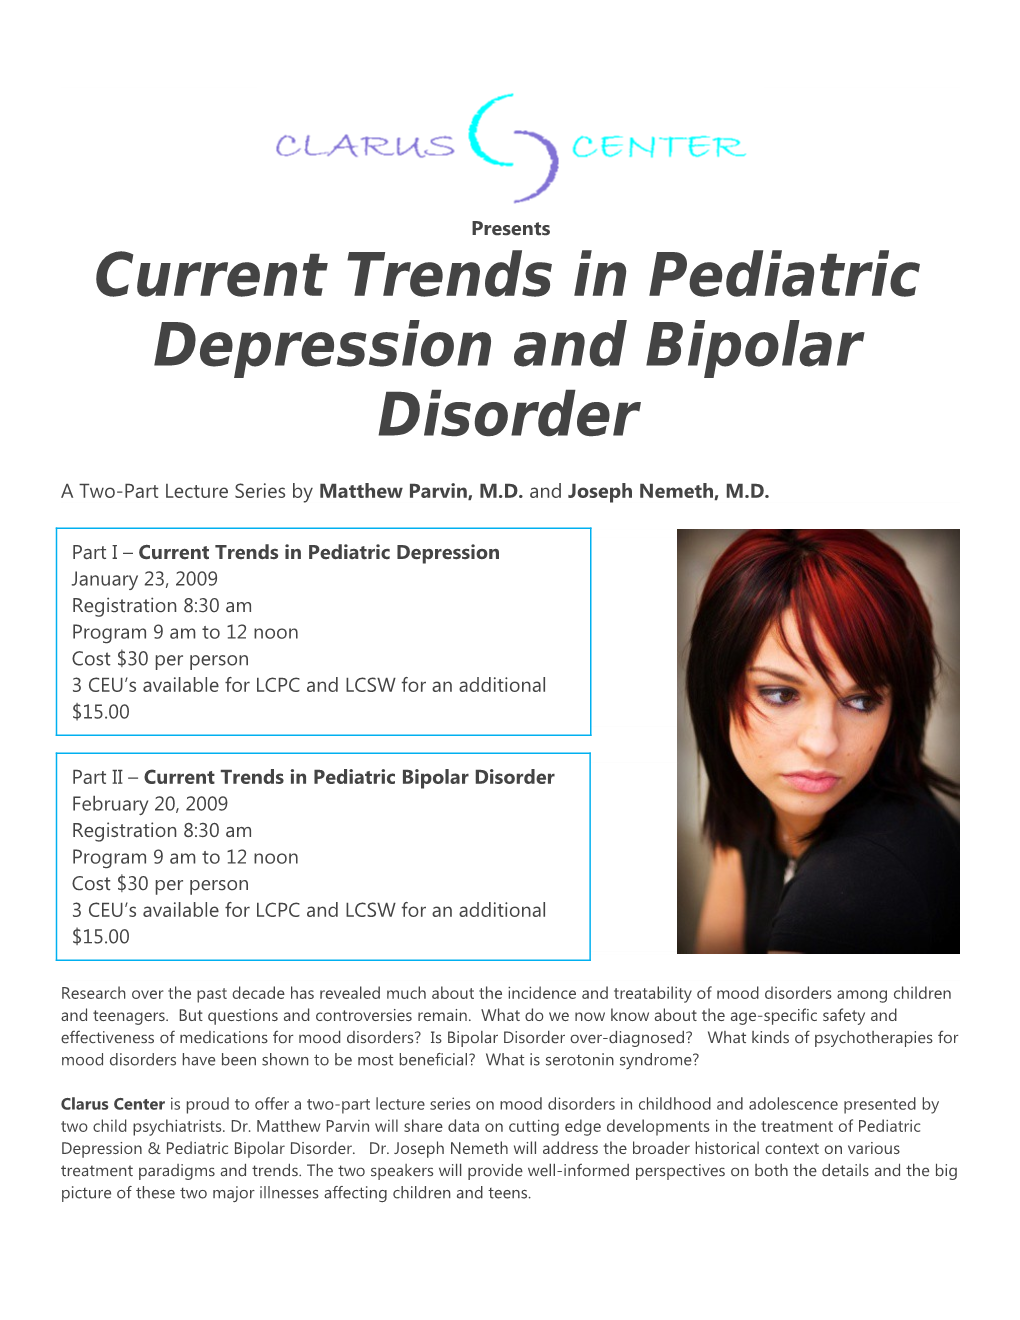 Current Trends in Pediatric Depression and Bipolar Disorder